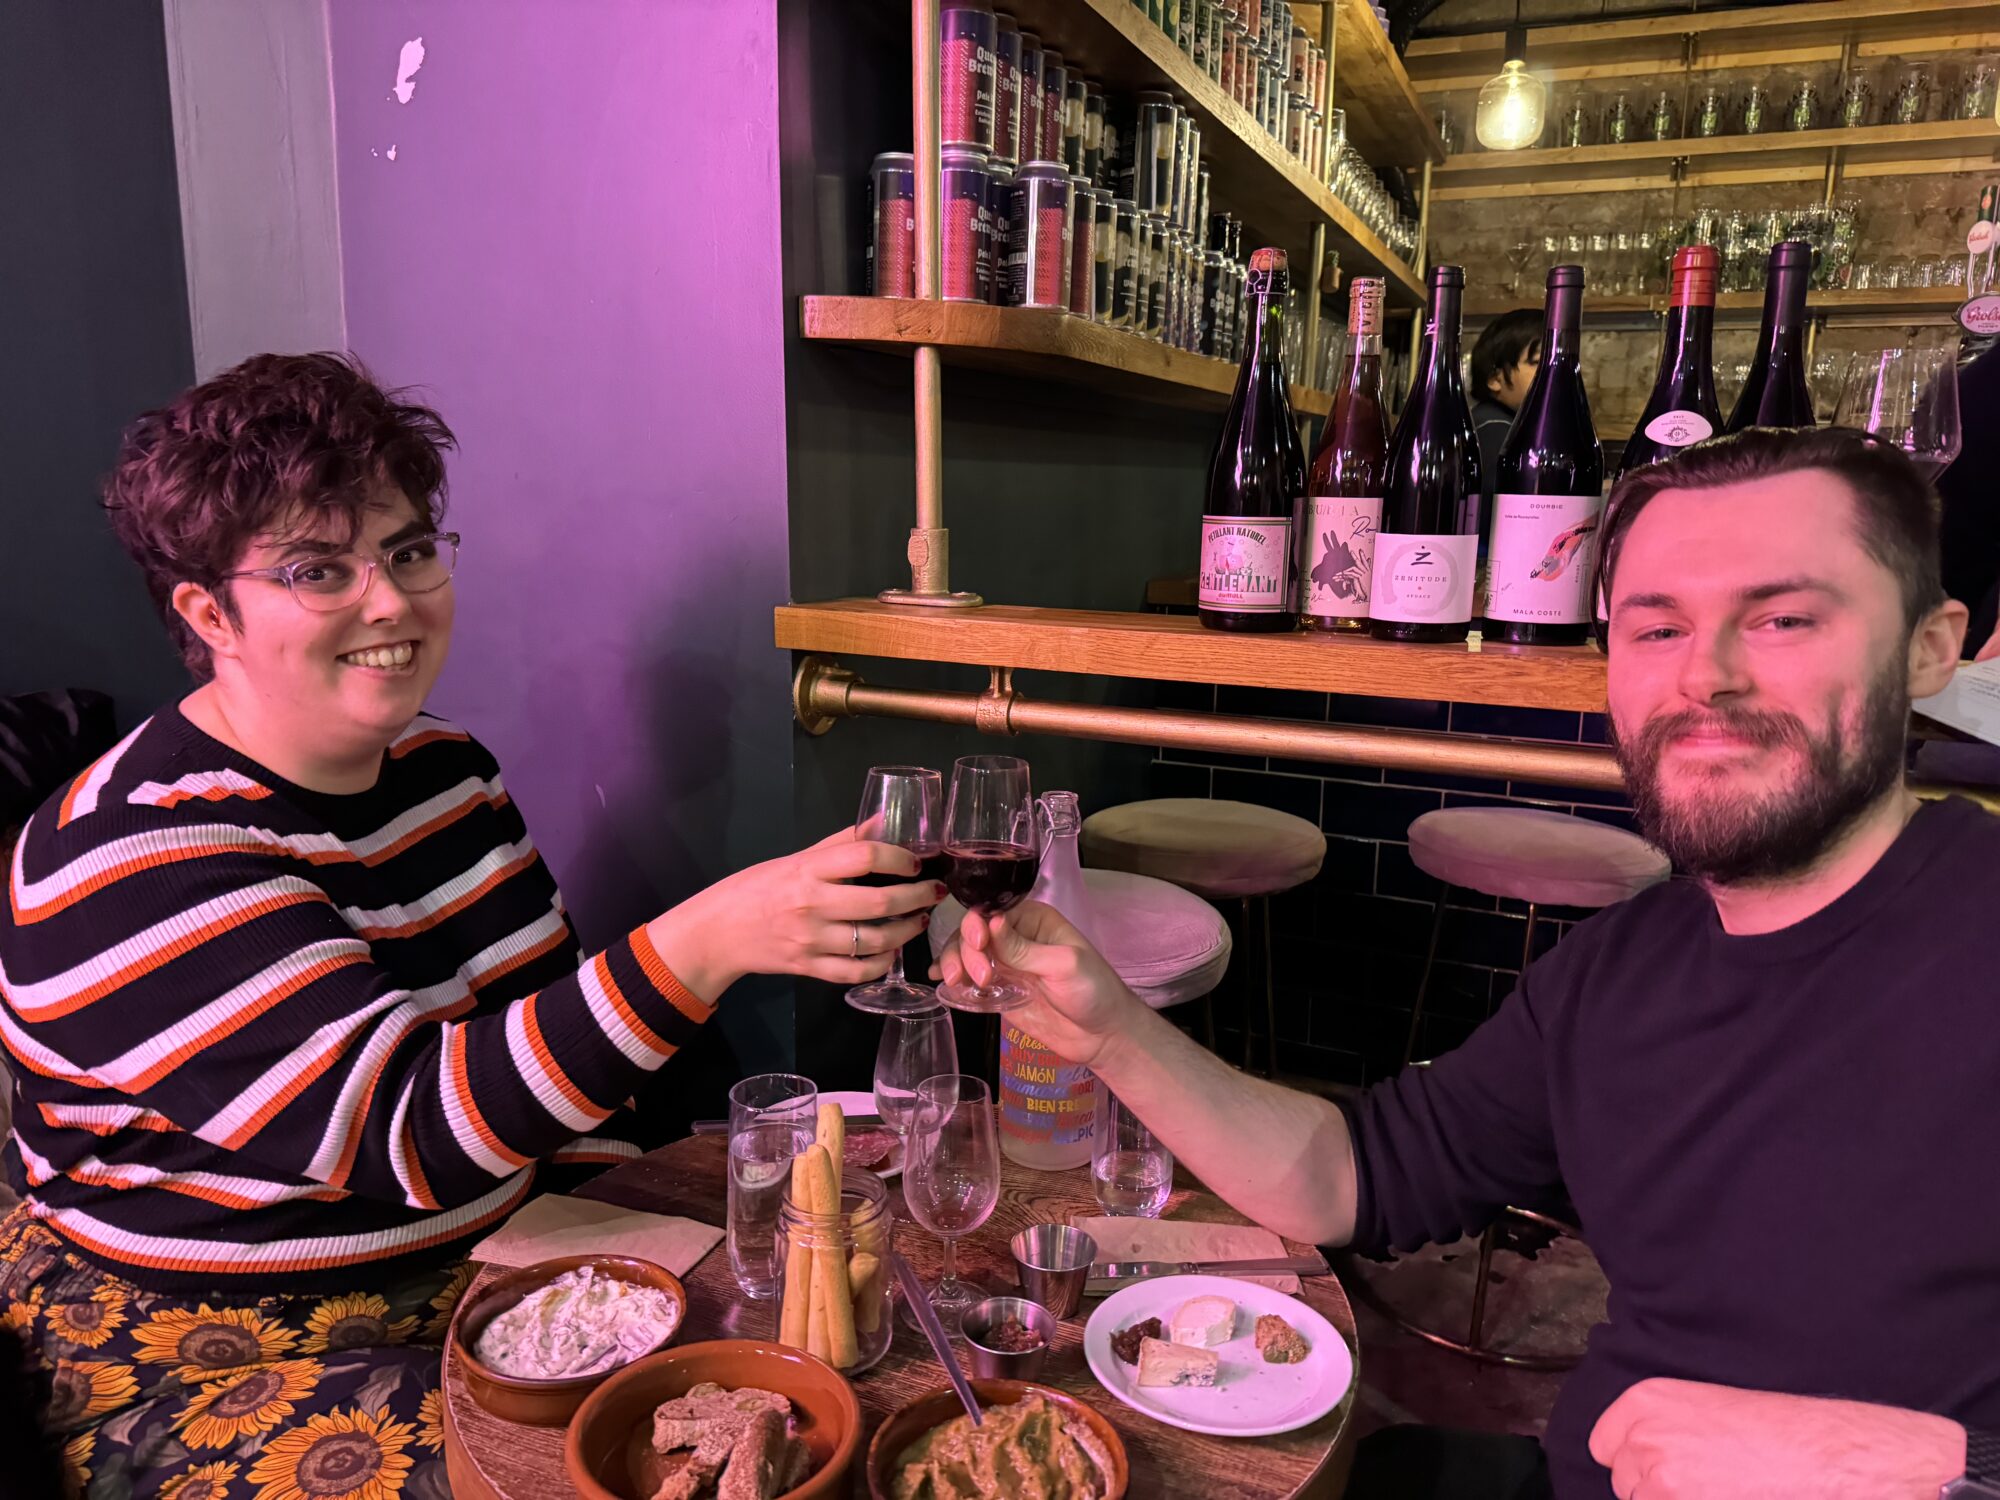 Rob and Gem, our regulars, enjoying the wine-tasting session